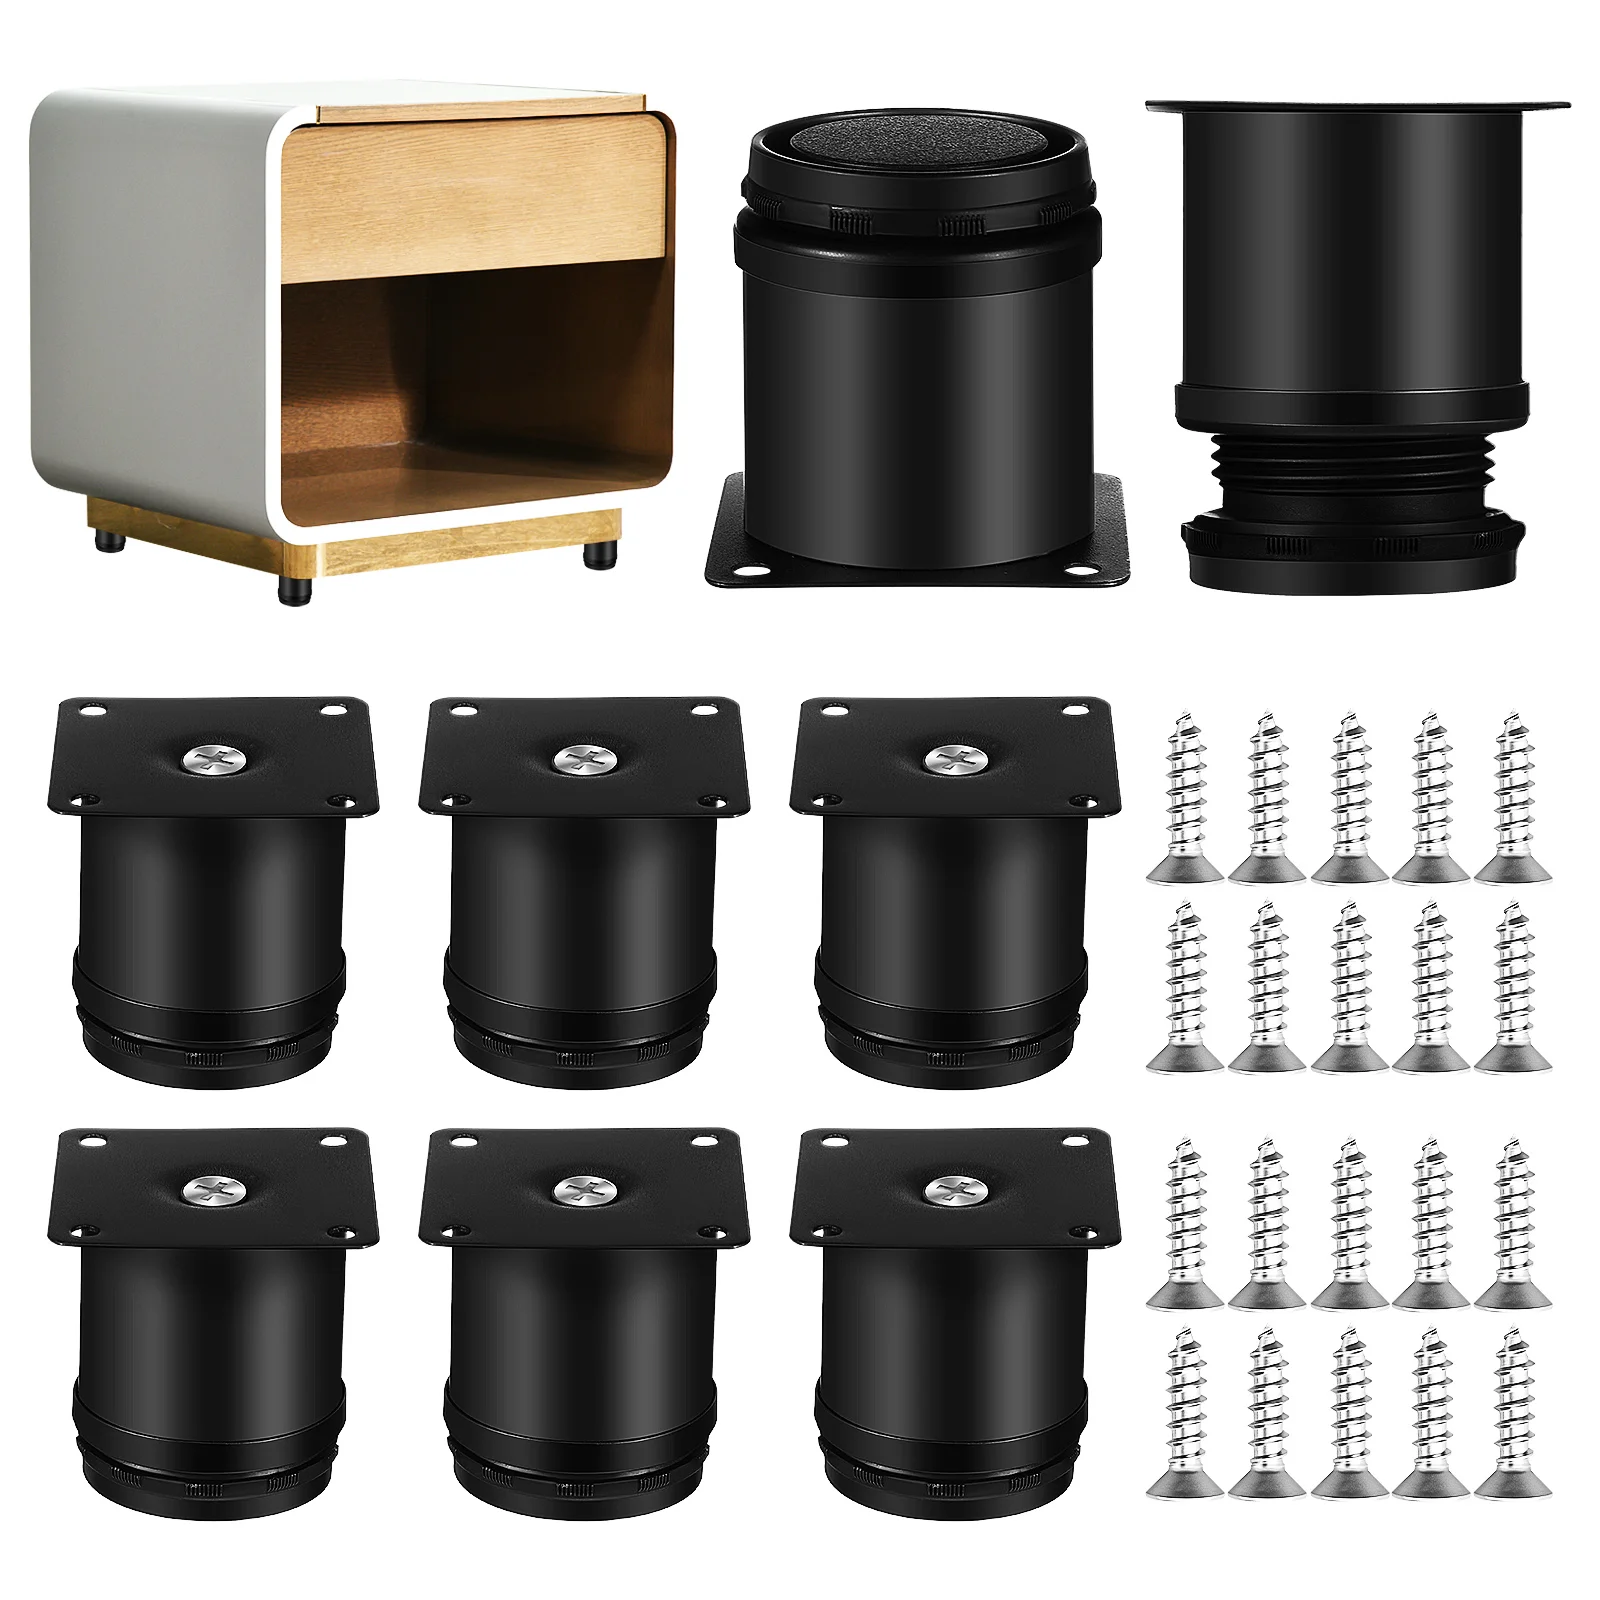 

8pcs Stainless Steel Furniture Legs Cabinet Legs Furniture Cabinet Feet Adjustable Couch Legs